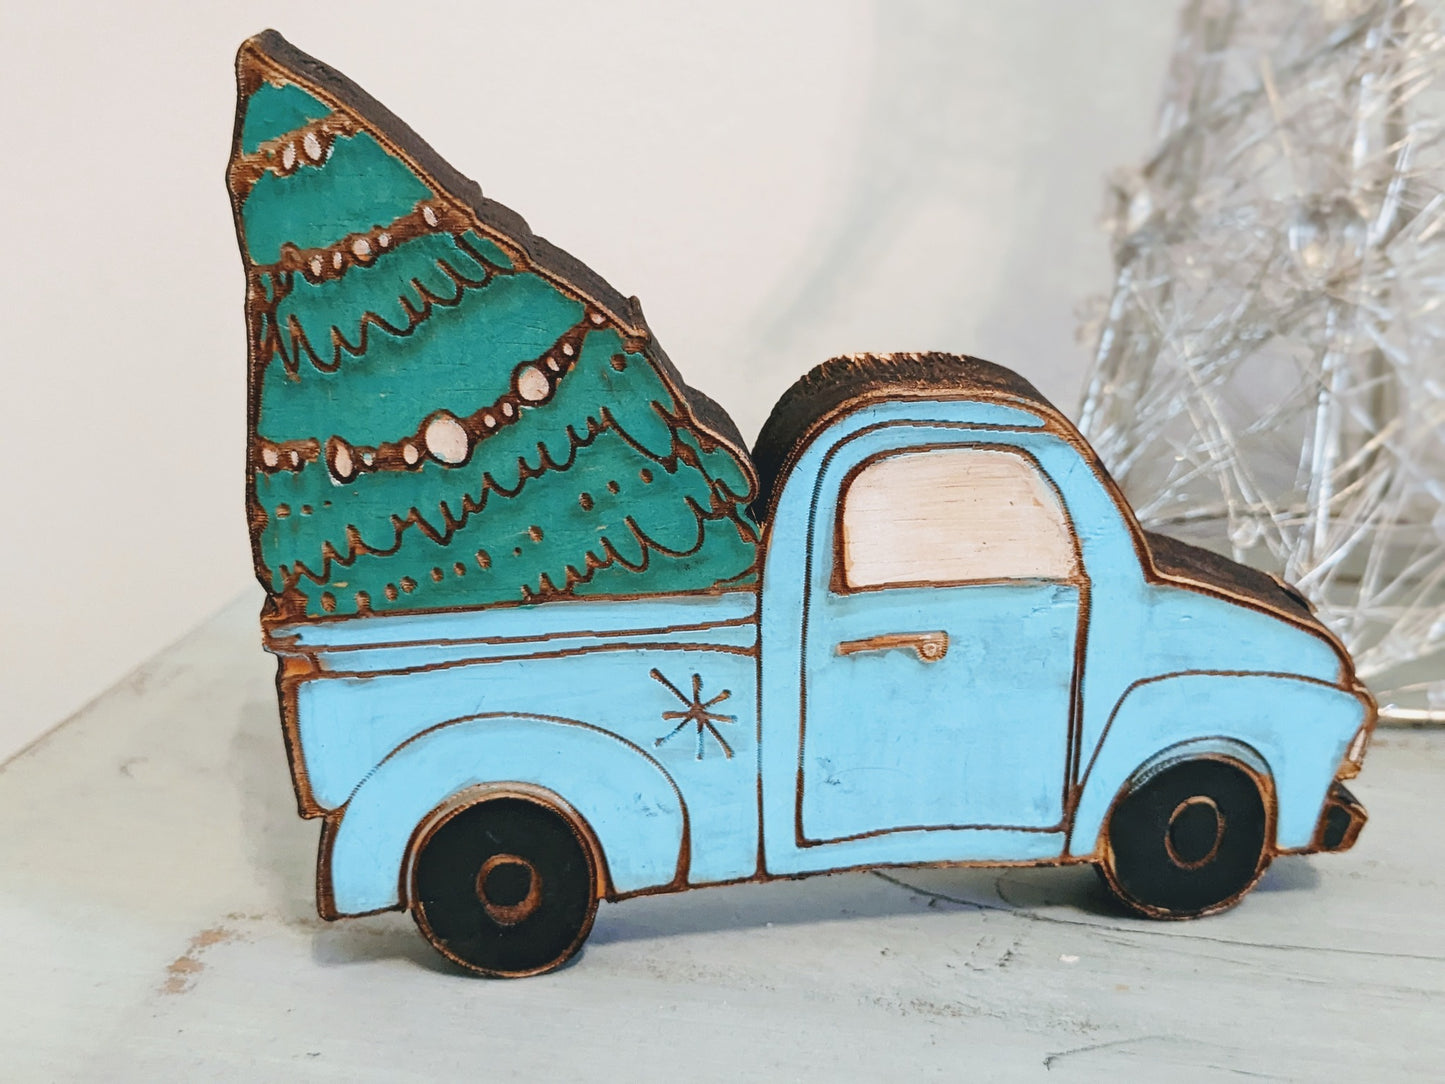 Wooden Handcrafted Handpaint Pick Up Truck | Christmas | Shelf Sitters